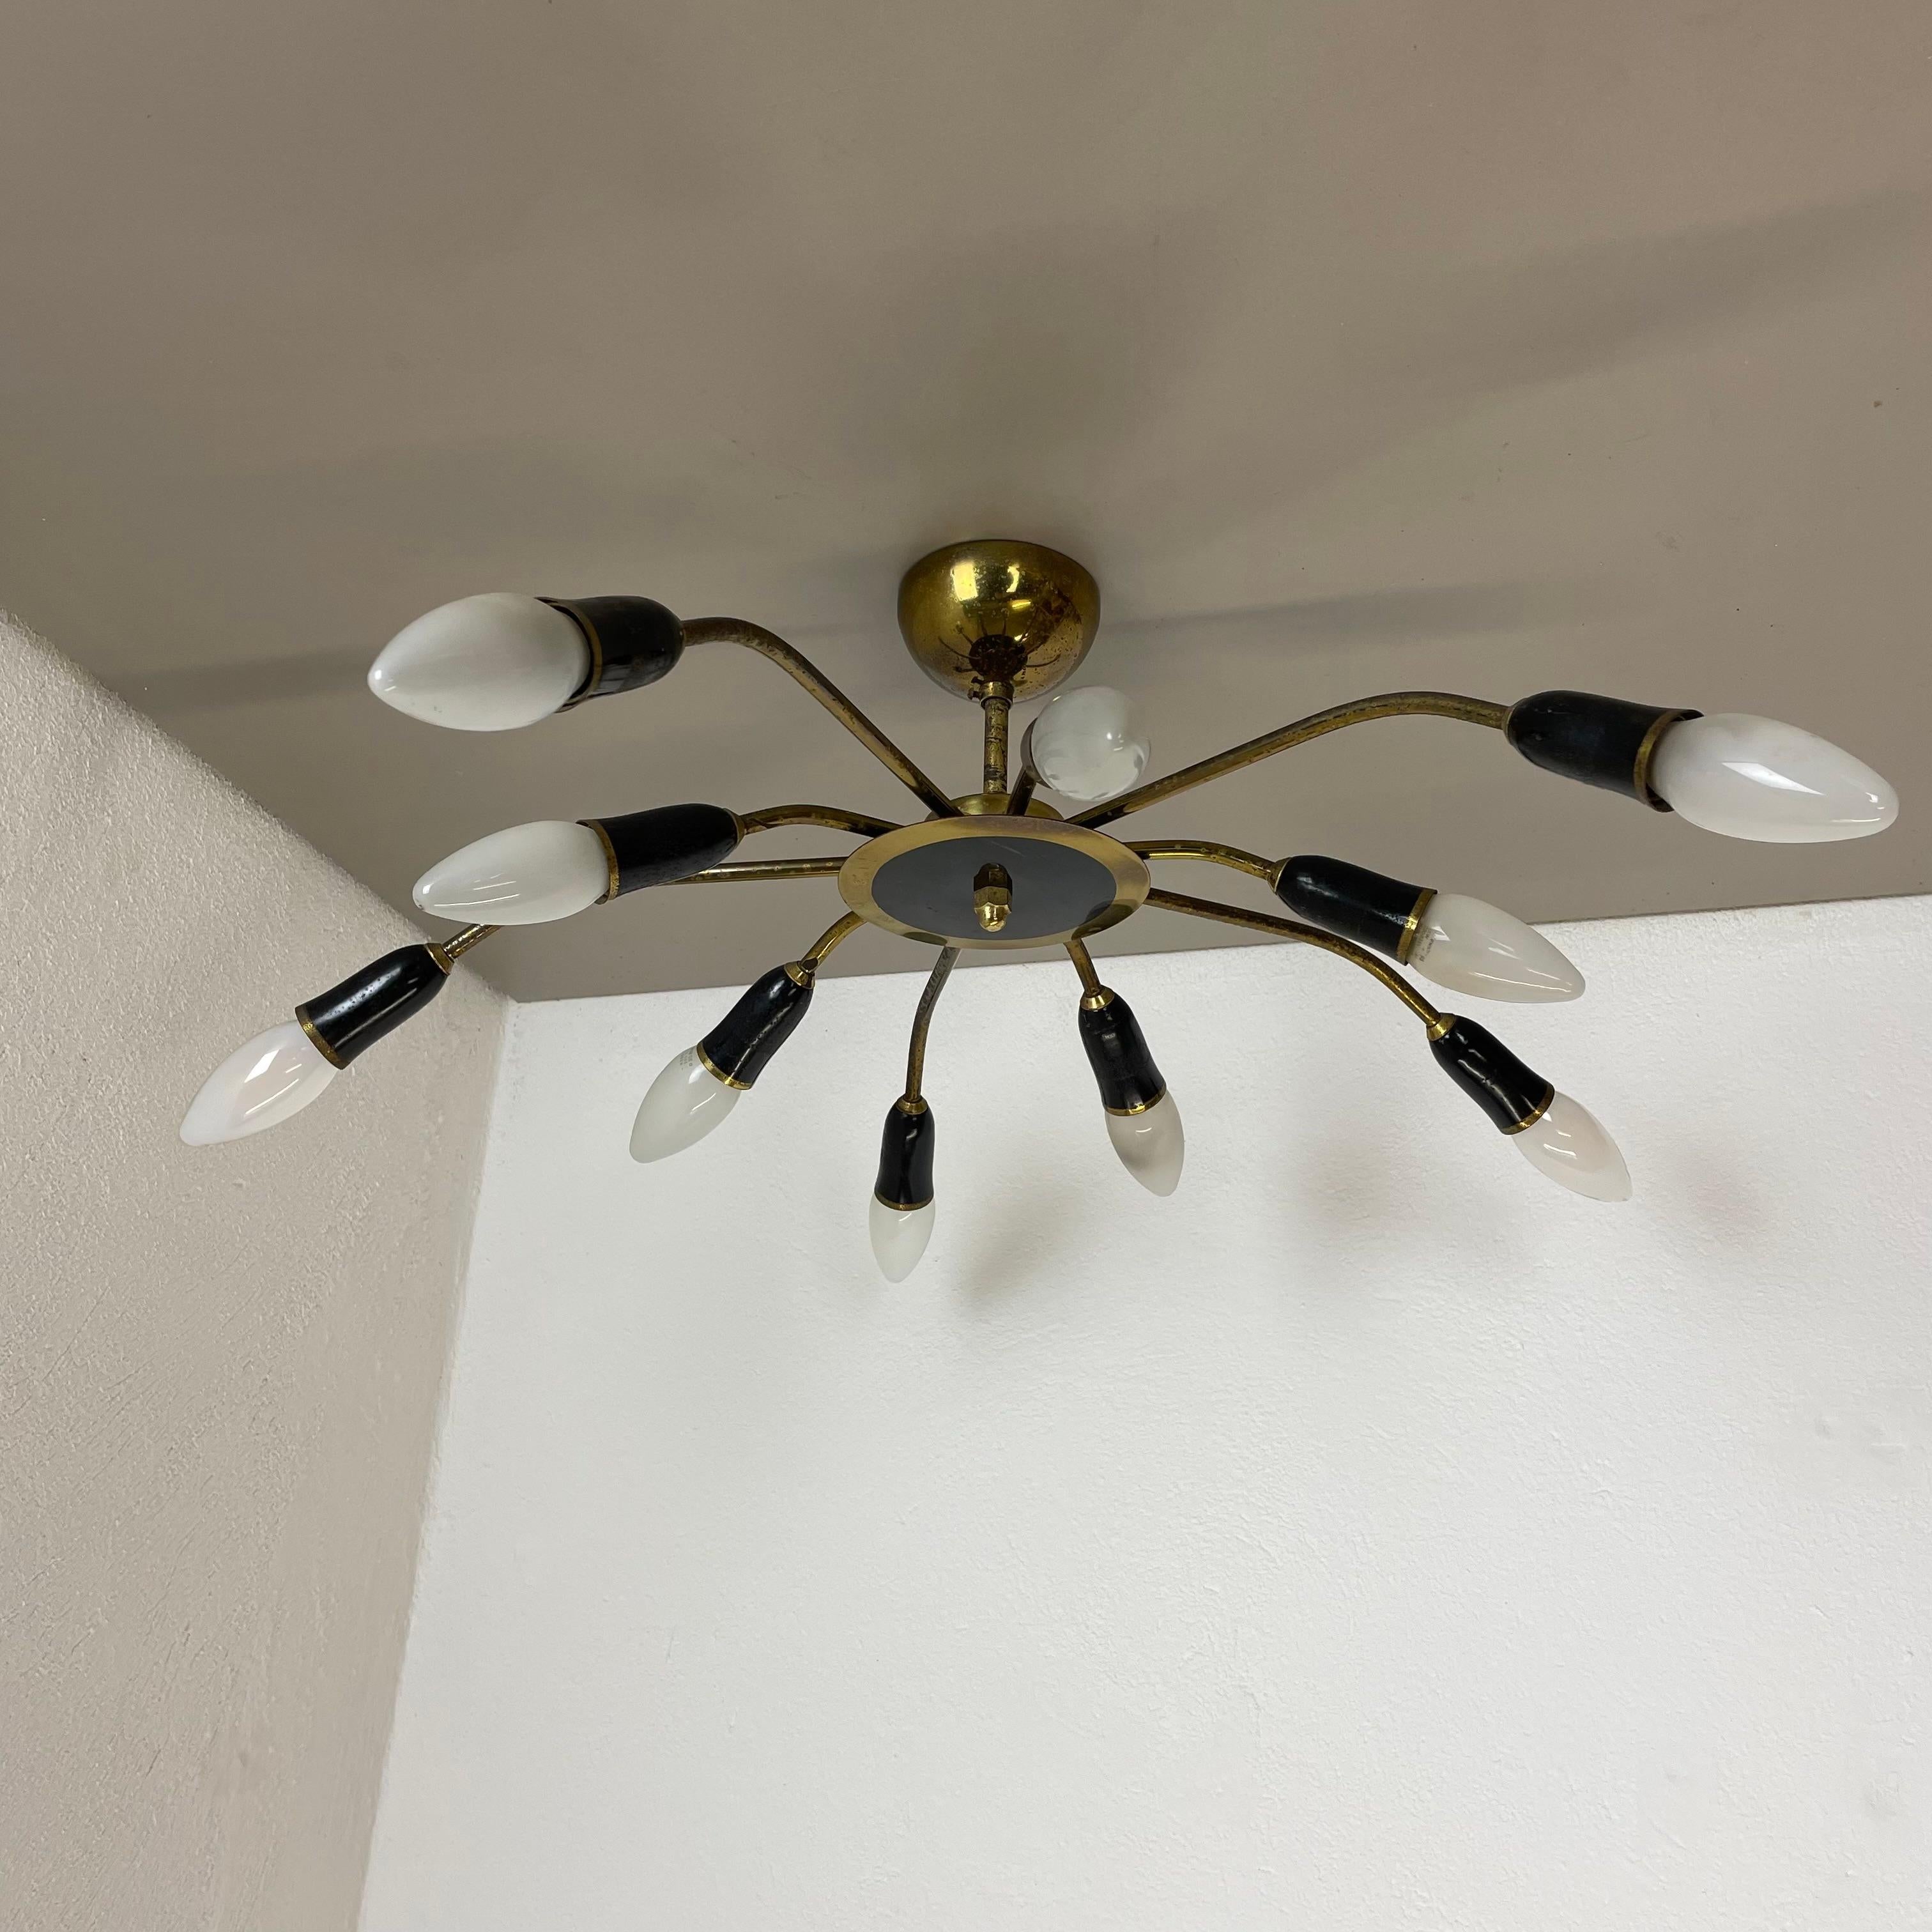 Article:

Ceiling light


Producer:

Origin Italy 
in the manner of Stilnovo, Gio Ponti



Age:

1950s



This modernist light was produced in Italy in the 1950s. It is made from solid metal brass with brass with 10 light arm elements. the light